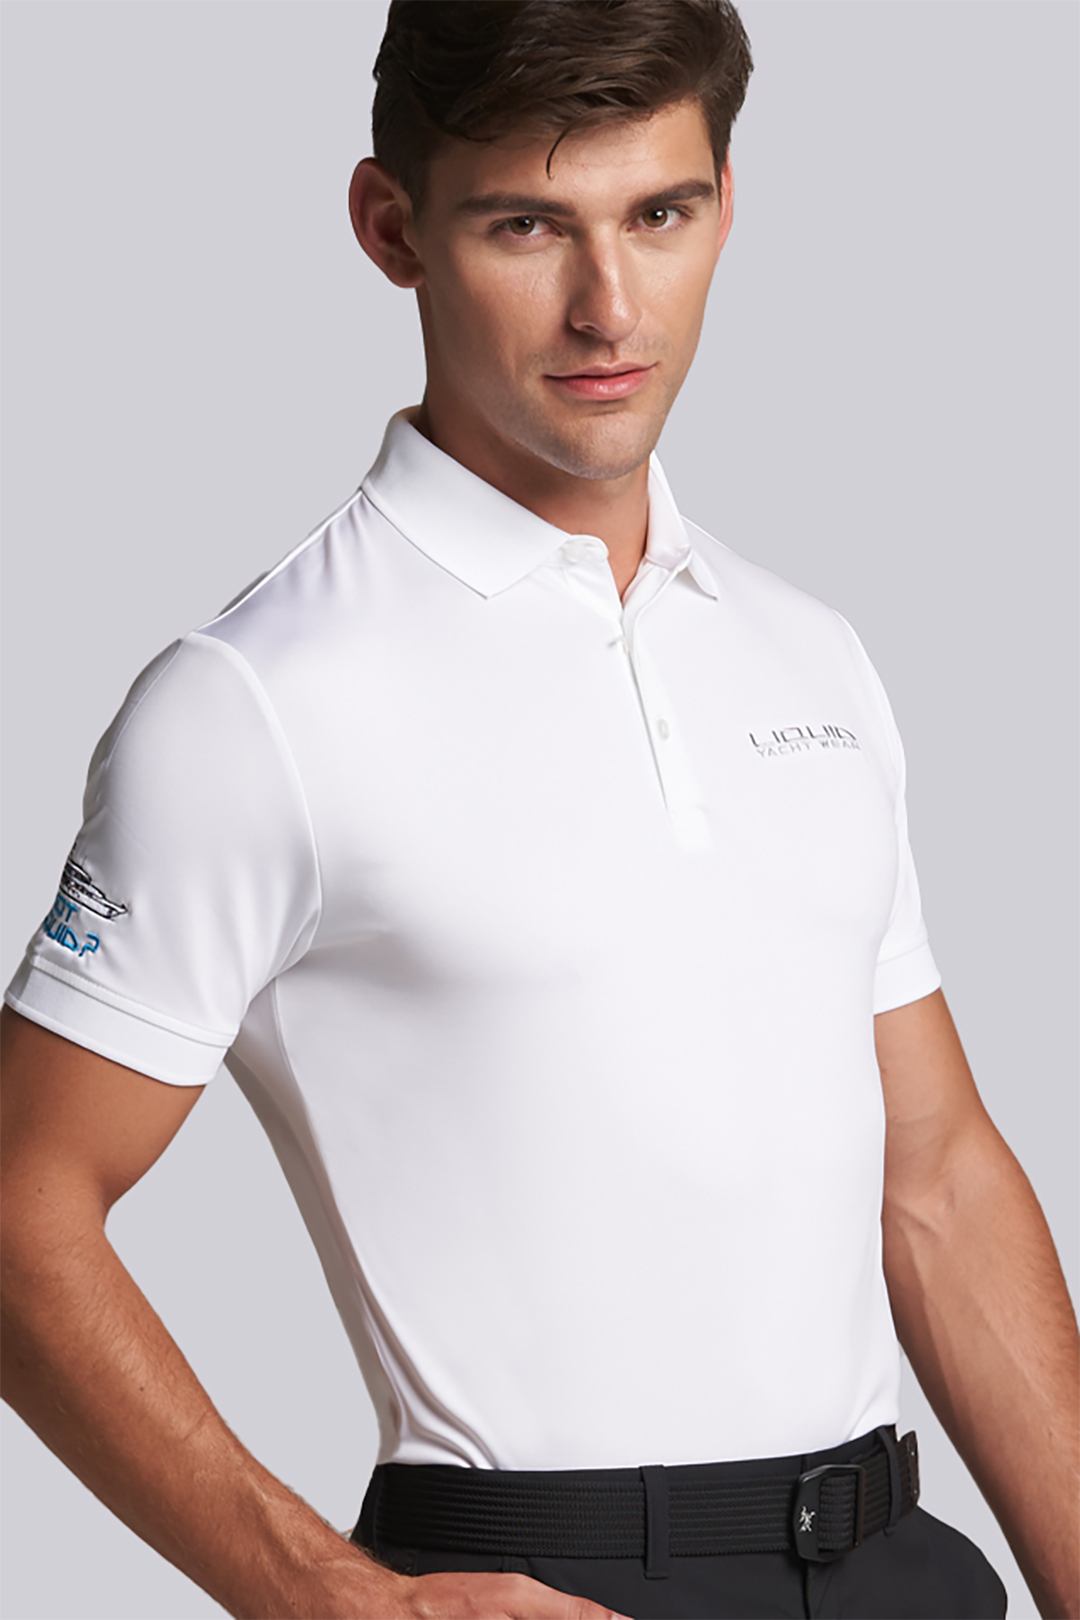 Why You Need a Performance Polo Shirt